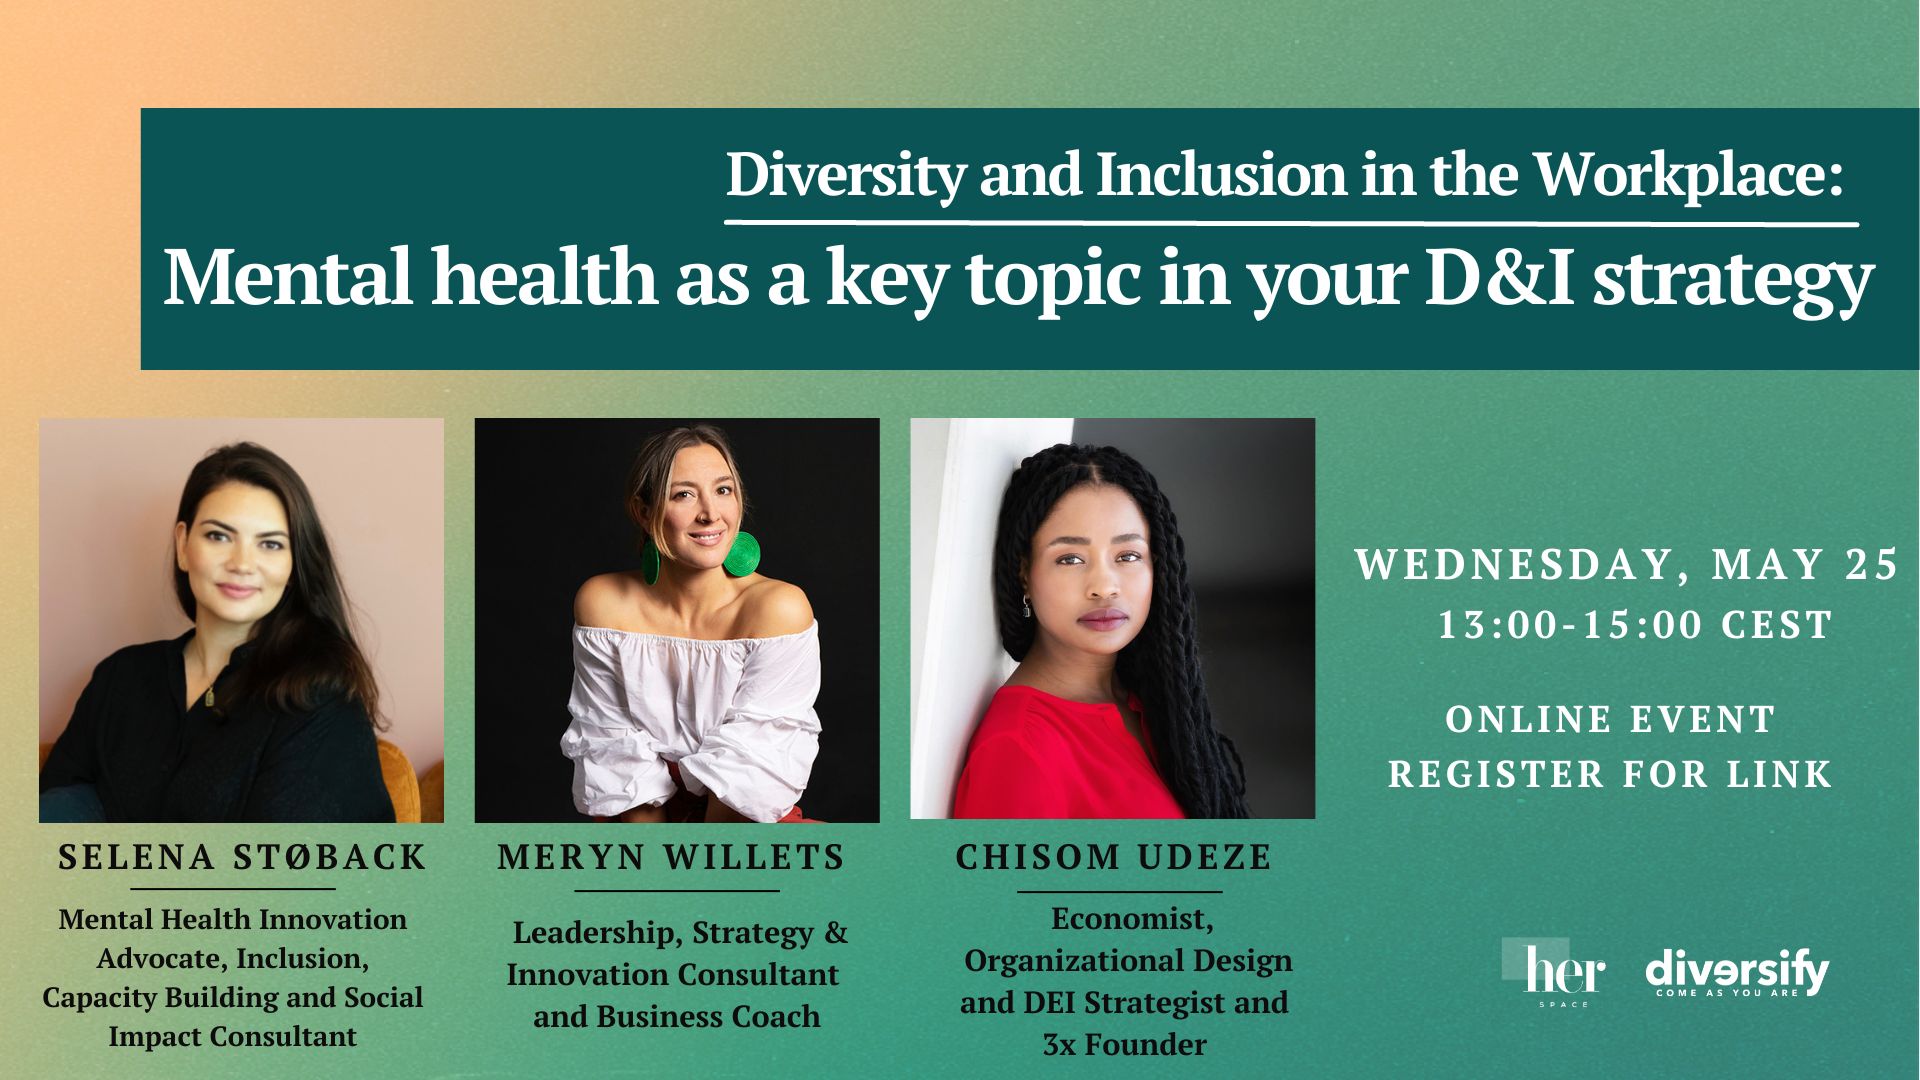 Diversity and Inclusion in the Workplace: Mental health as a key topic in your D&I Strategy